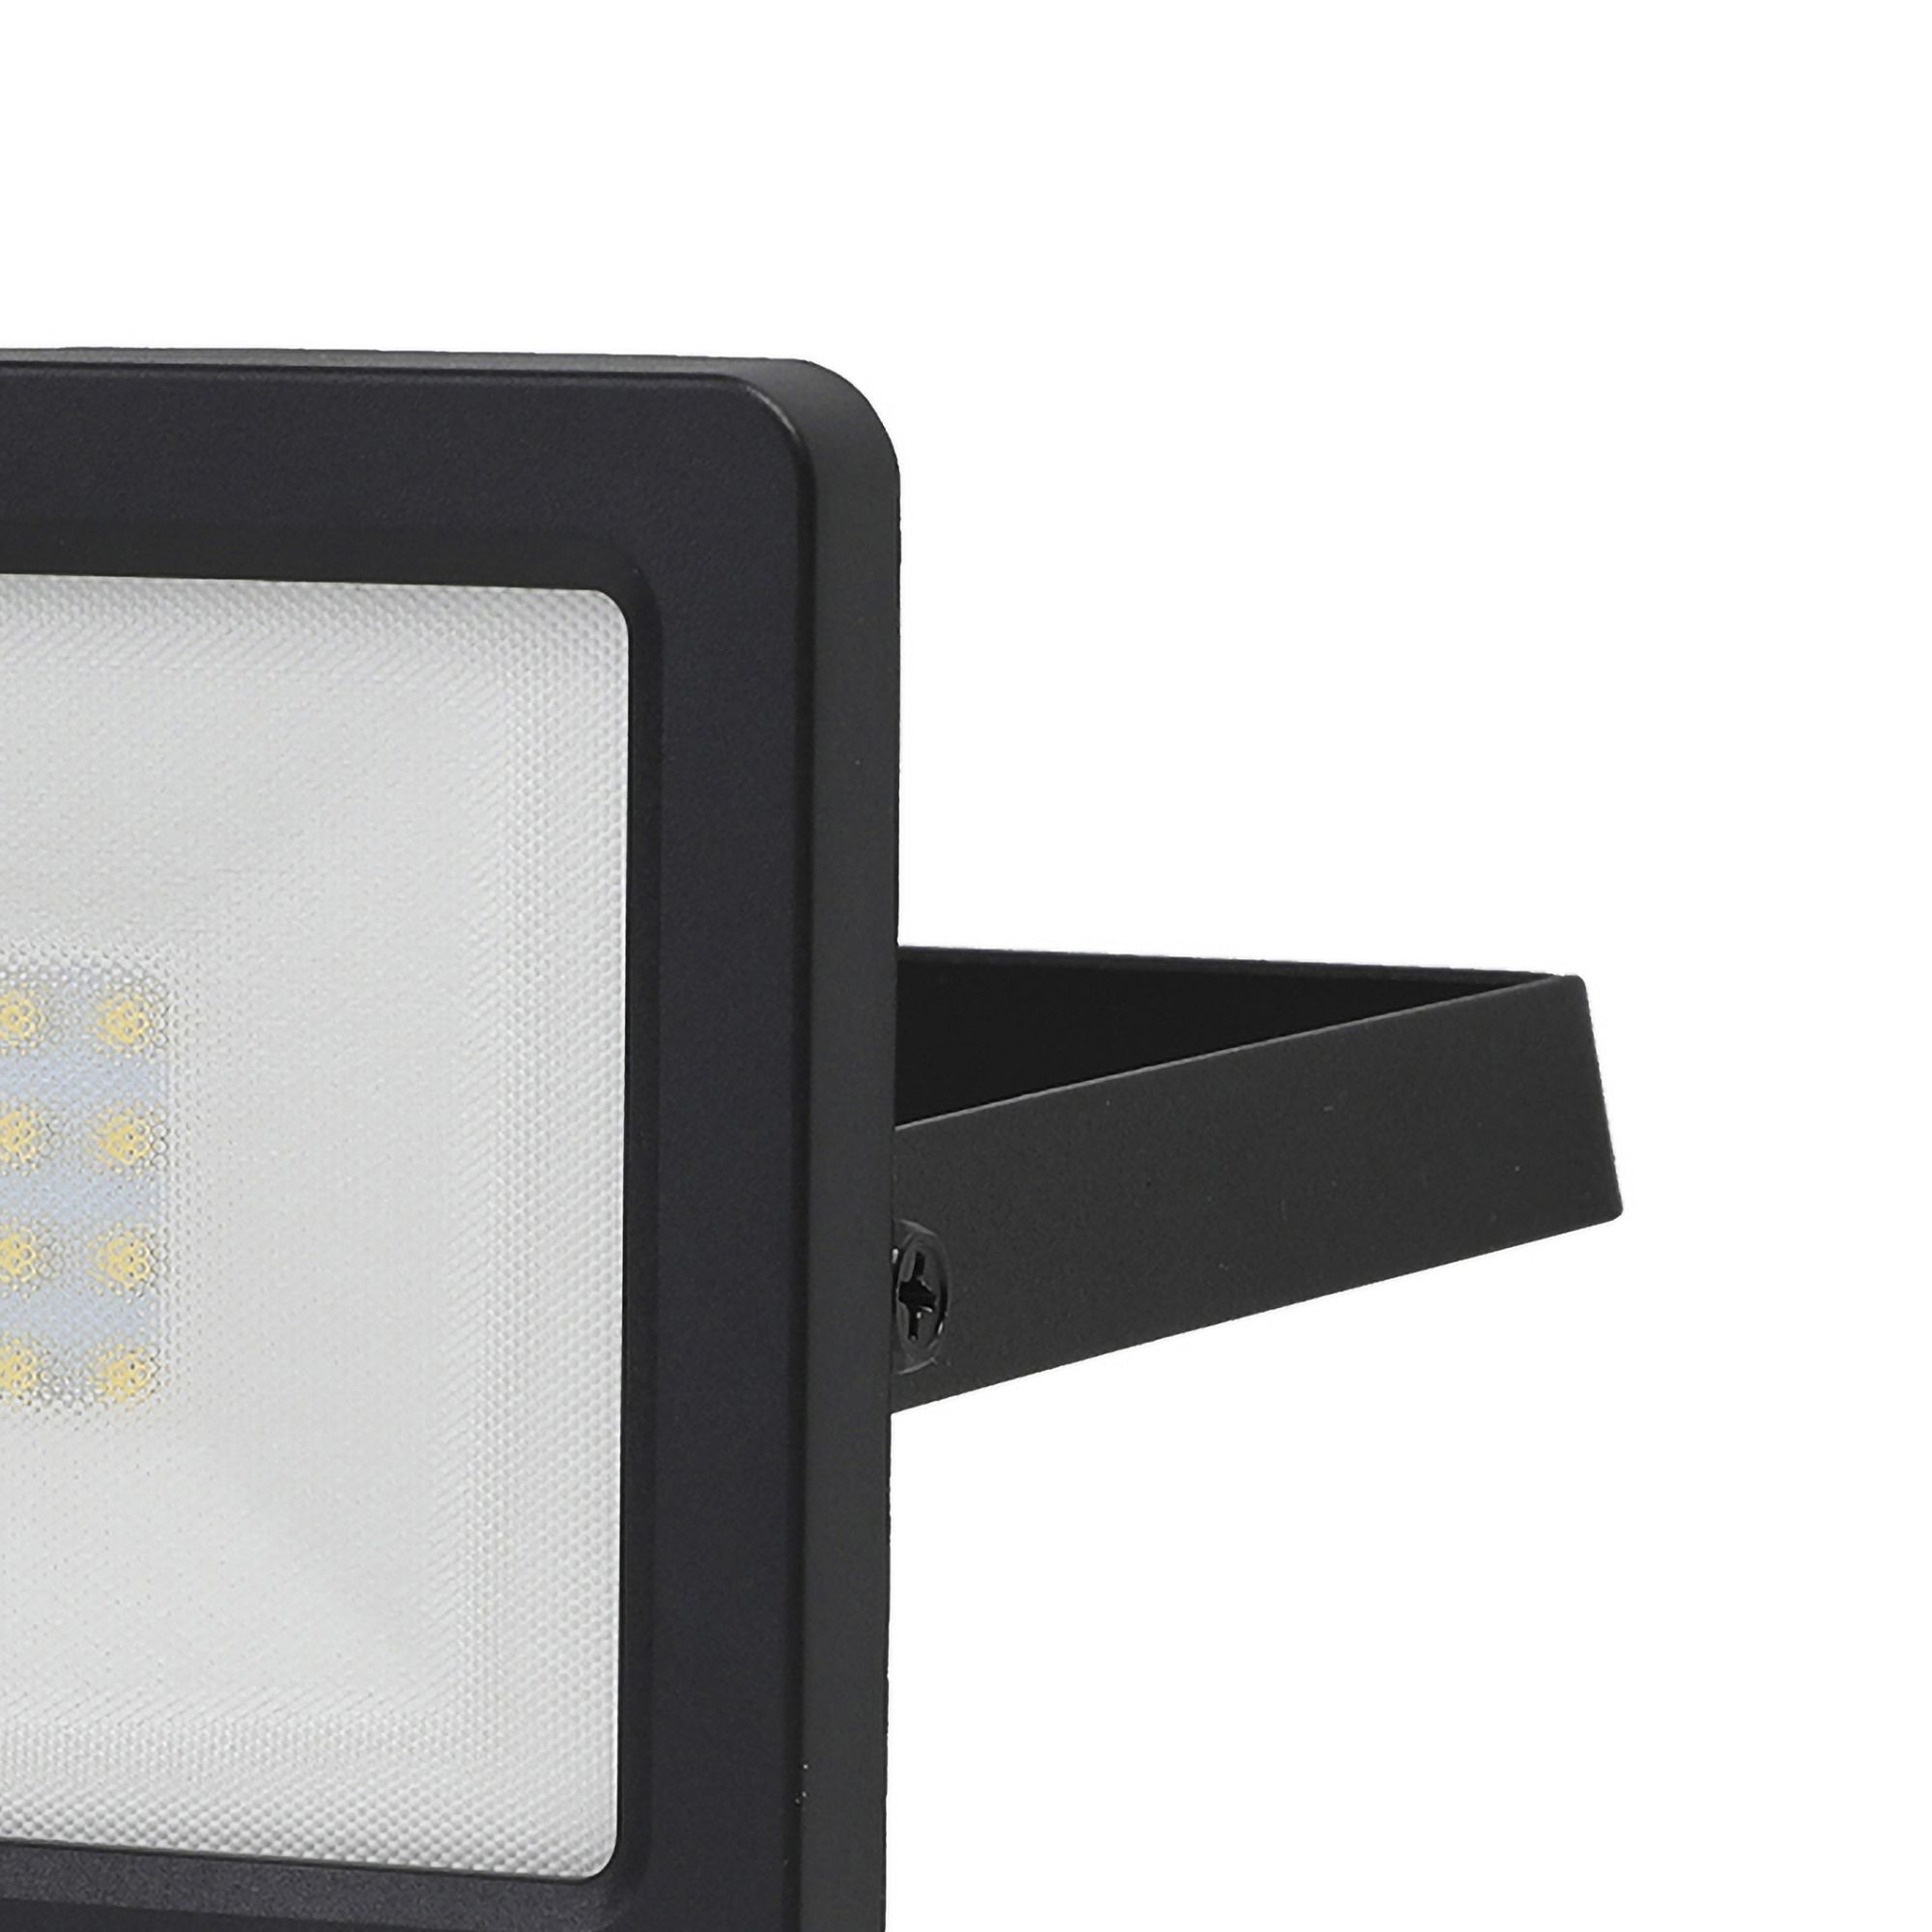 GoodHome Lucan AFD1018-IB Black Mains-powered Cool white Outdoor LED PIR Floodlight 2000lm